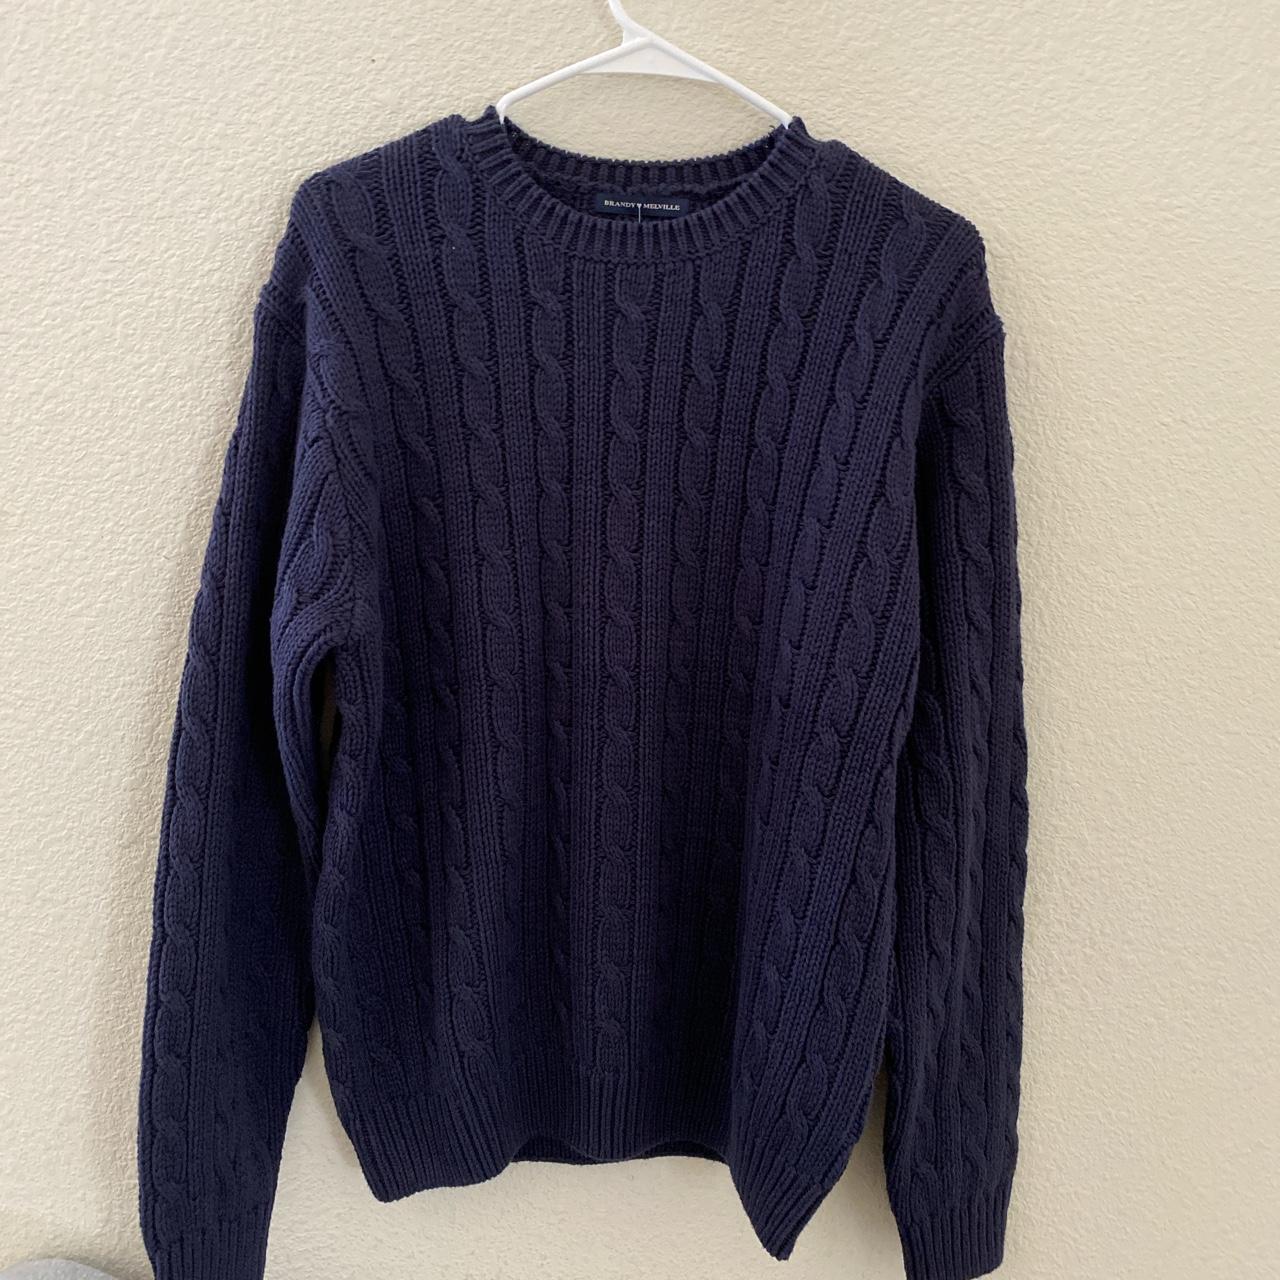 Brandy melville blue Brianna cable knit sweater - Depop